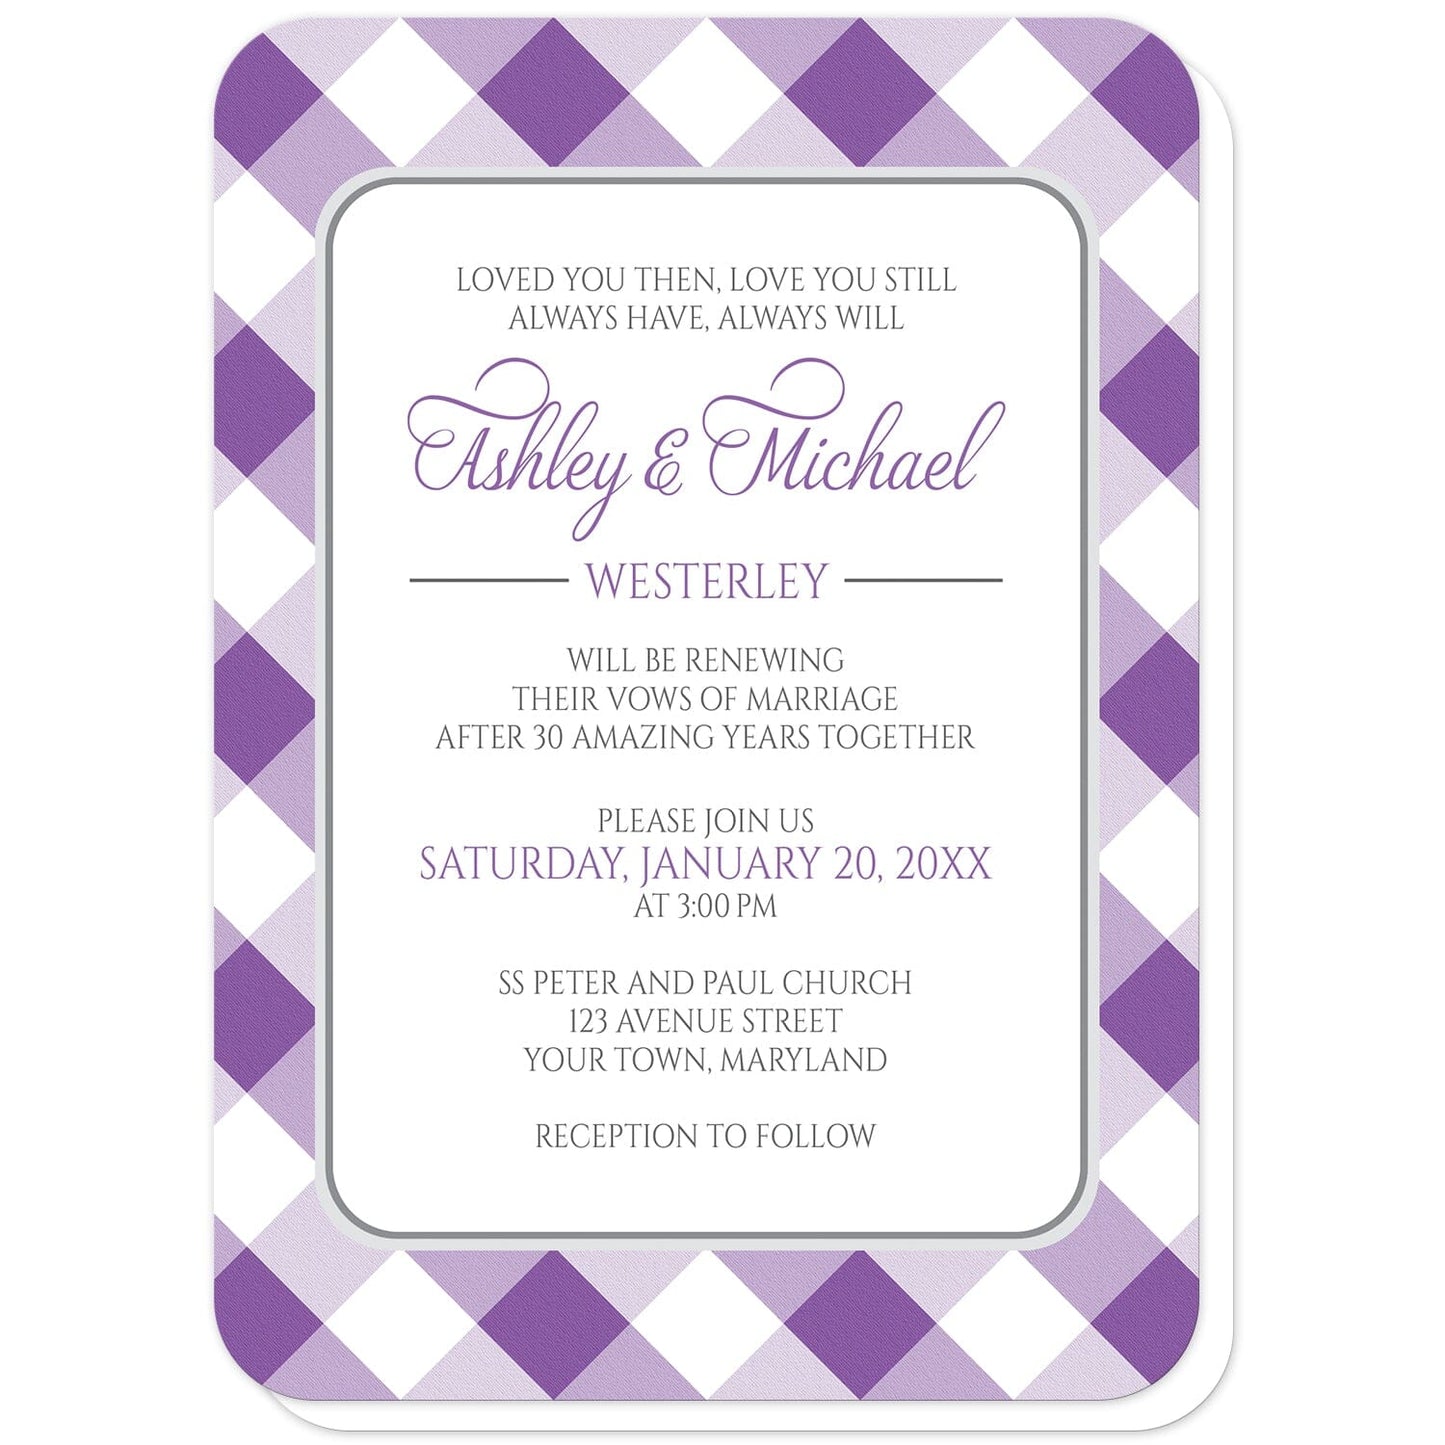 Purple Gingham Vow Renewal Invitations (with rounded corners) at Artistically Invited. Purple gingham vow renewal invitations with your personalized ceremony details custom printed in purple and gray inside a white rectangular area outlined in gray. The background design is a diagonal purple and white gingham pattern. 